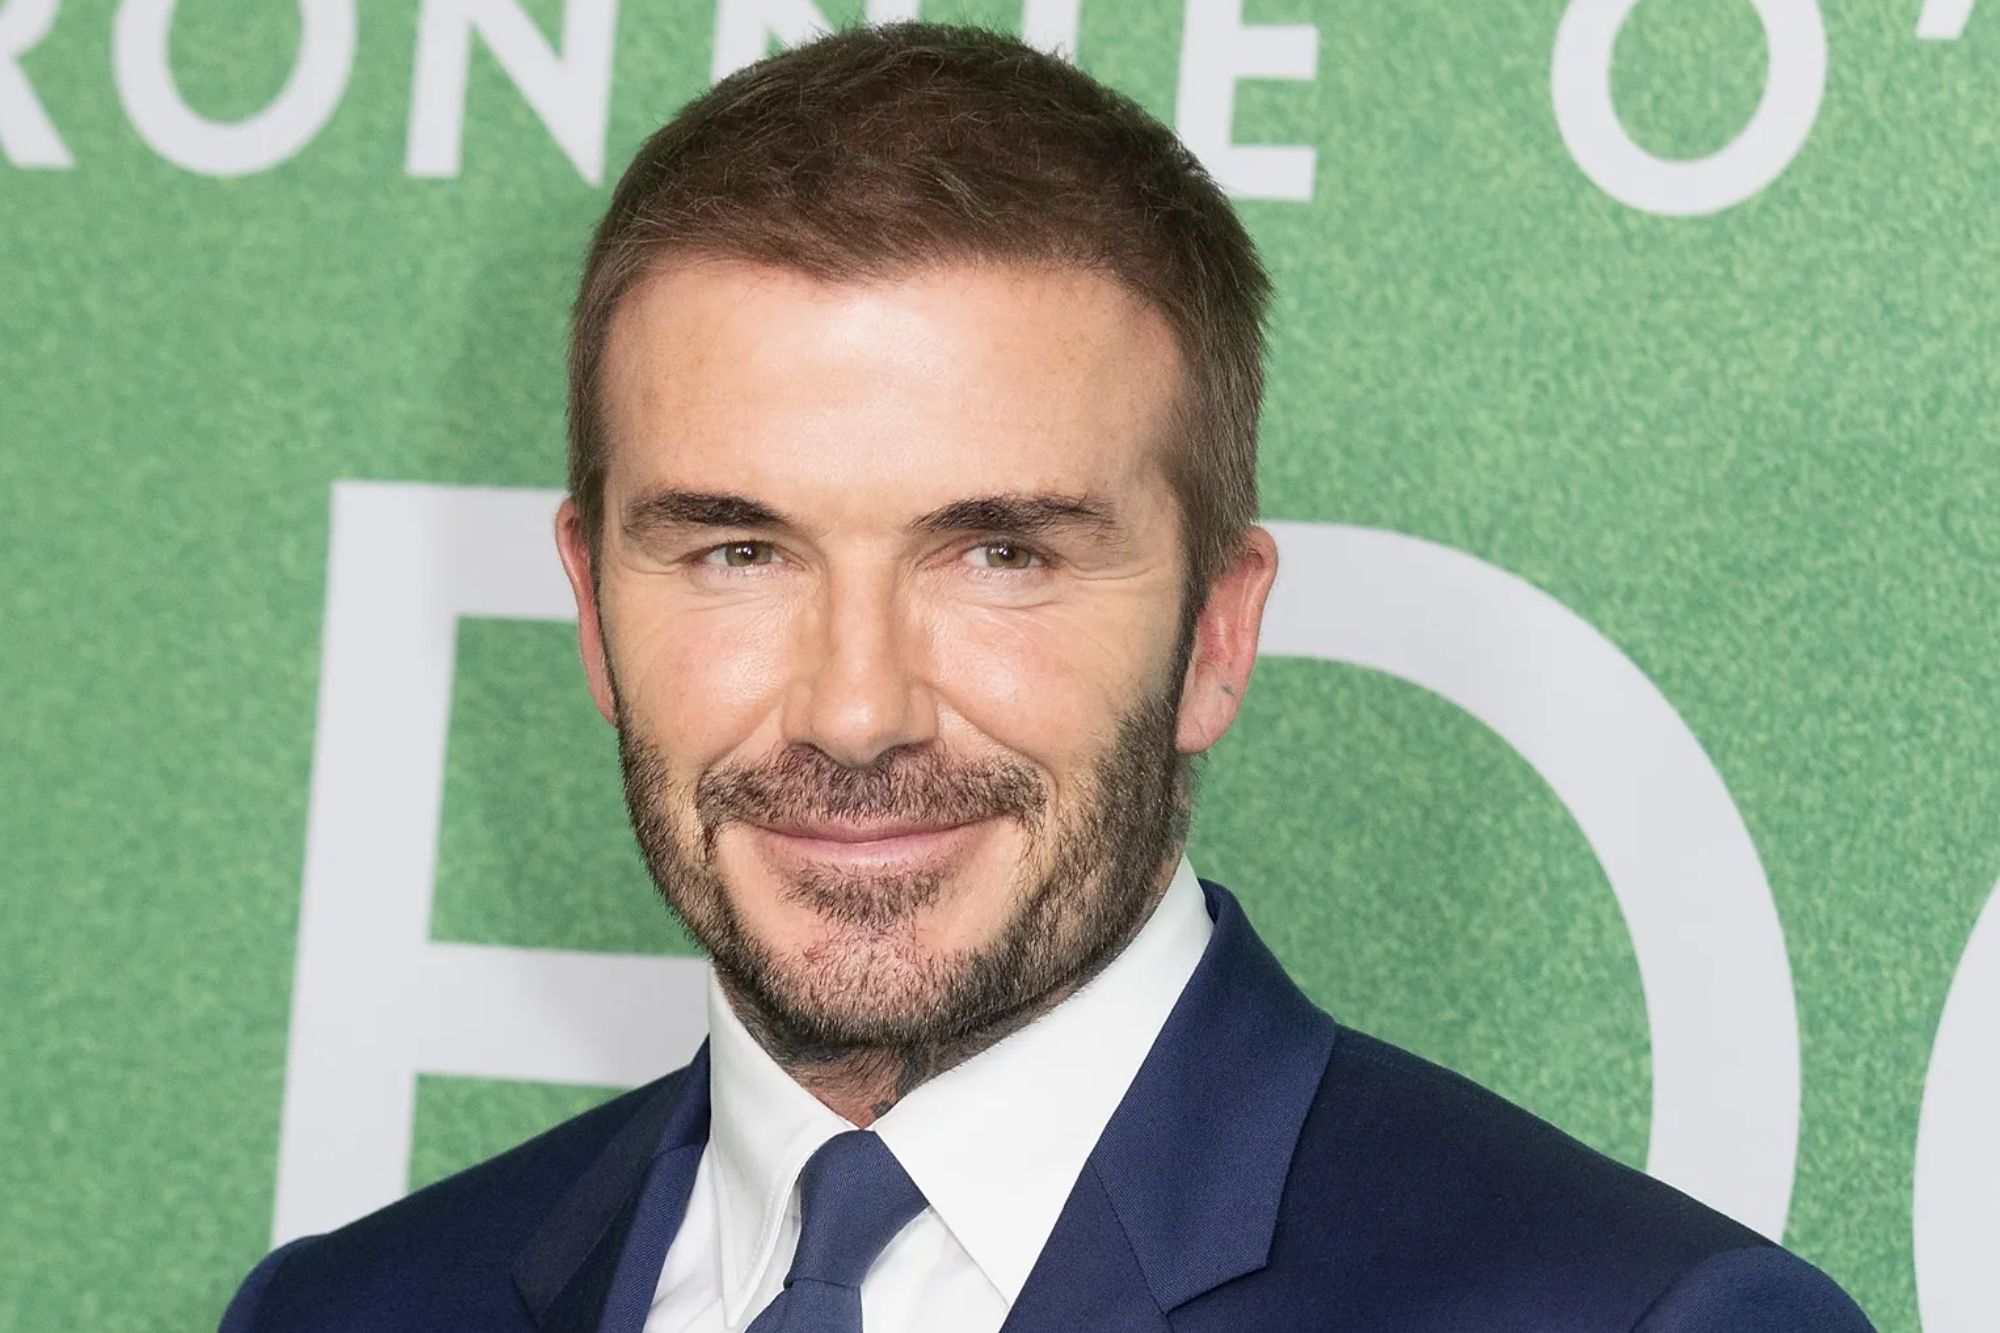 David Beckham signs huge £5m ad deal with major Chinese retailer for Euros